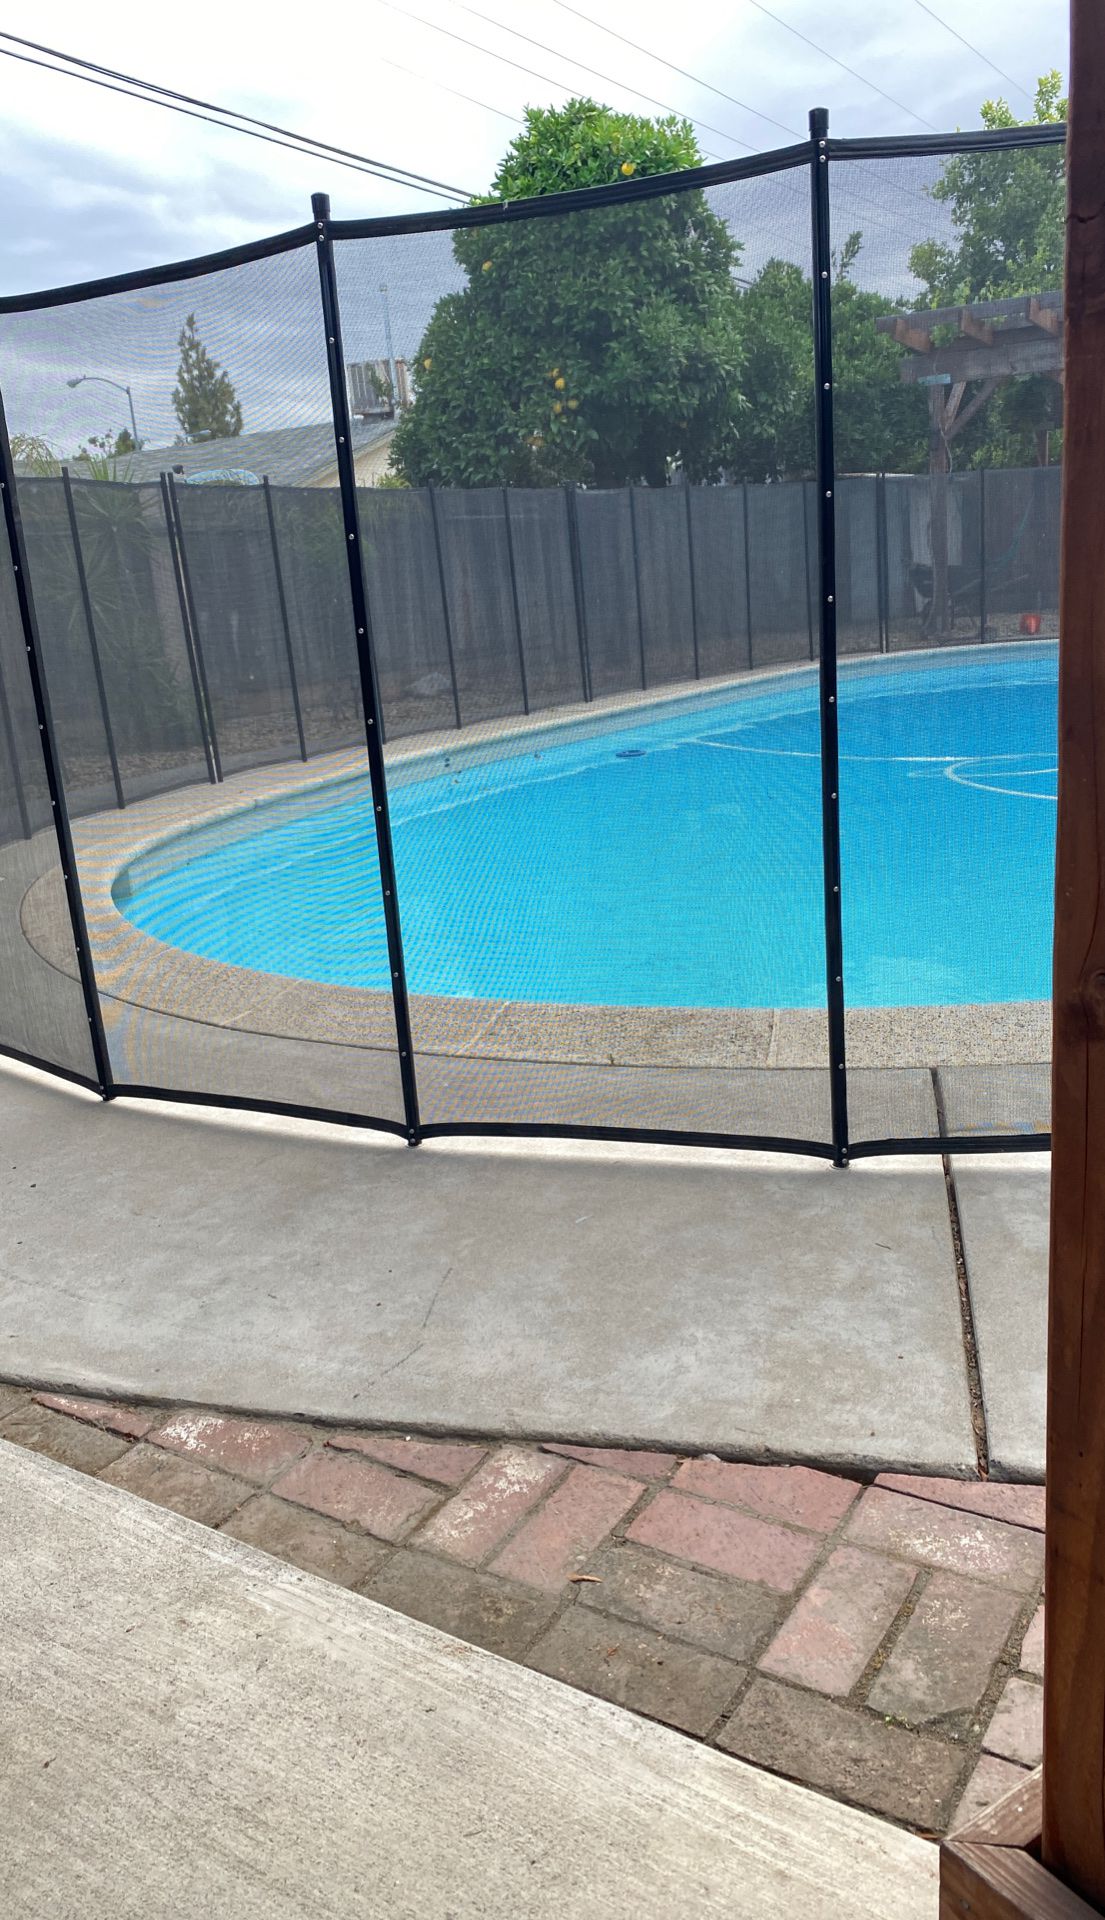 Looking to purchase pool chemicals